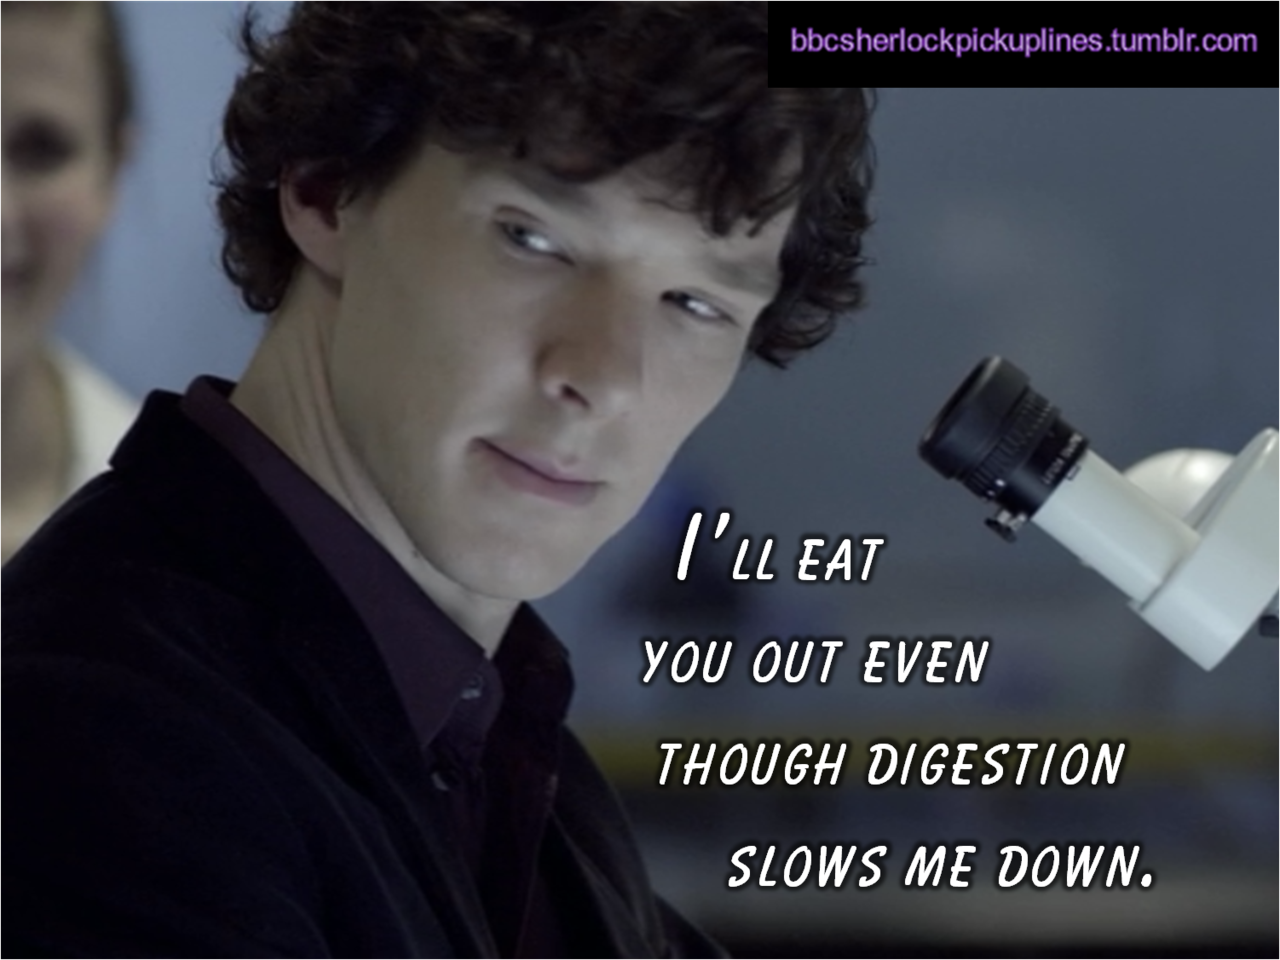 The best of miscellaneous episode references, from BBC Sherlock pick-up lines.